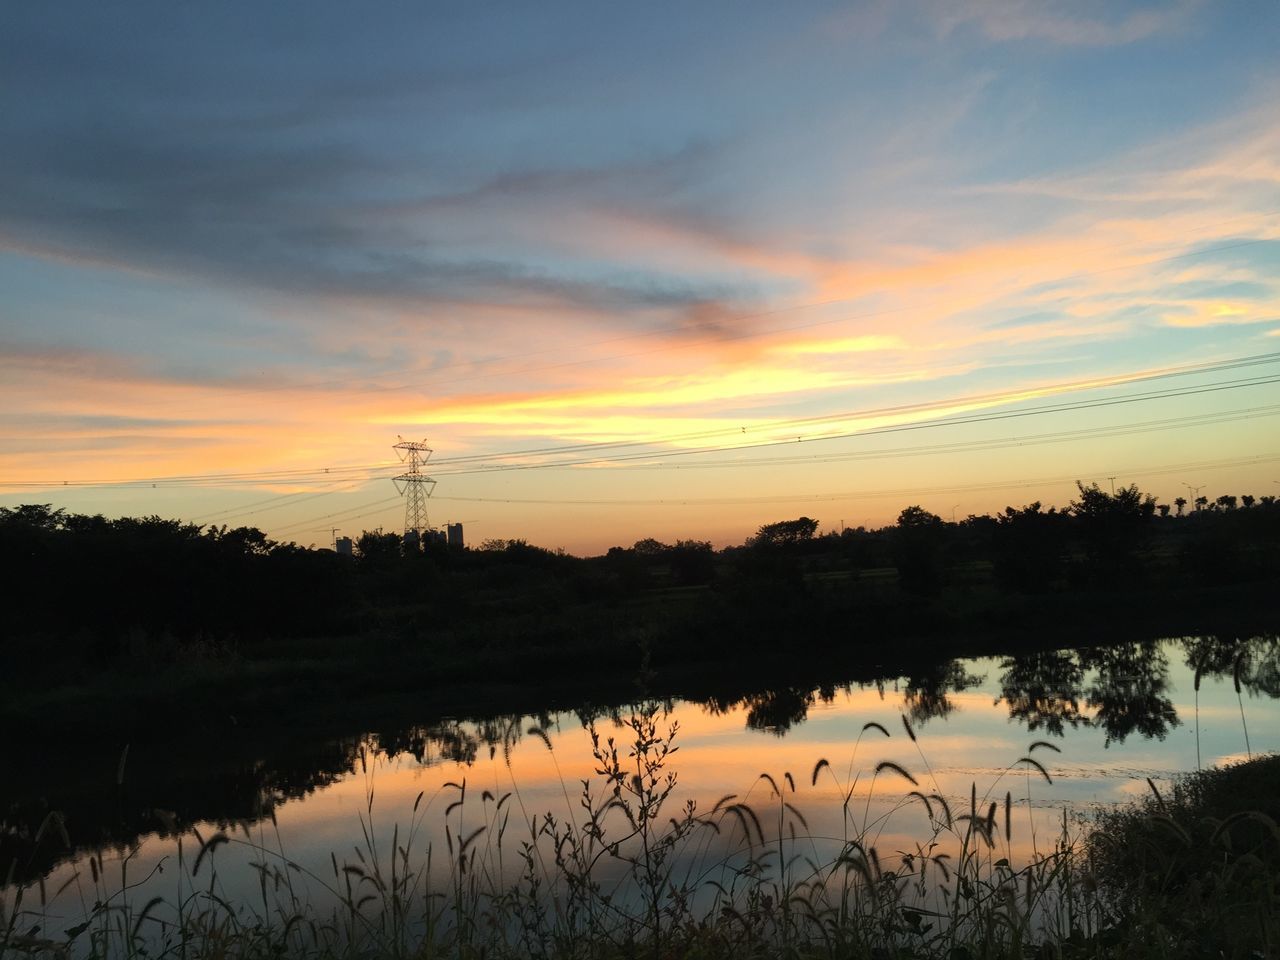 sunset, tranquility, tranquil scene, scenics, sky, water, beauty in nature, orange color, reflection, lake, nature, cloud - sky, idyllic, plant, tree, landscape, cloud, power line, growth, non-urban scene, outdoors, no people, dramatic sky, calm, majestic, grass, non urban scene, remote, rural scene